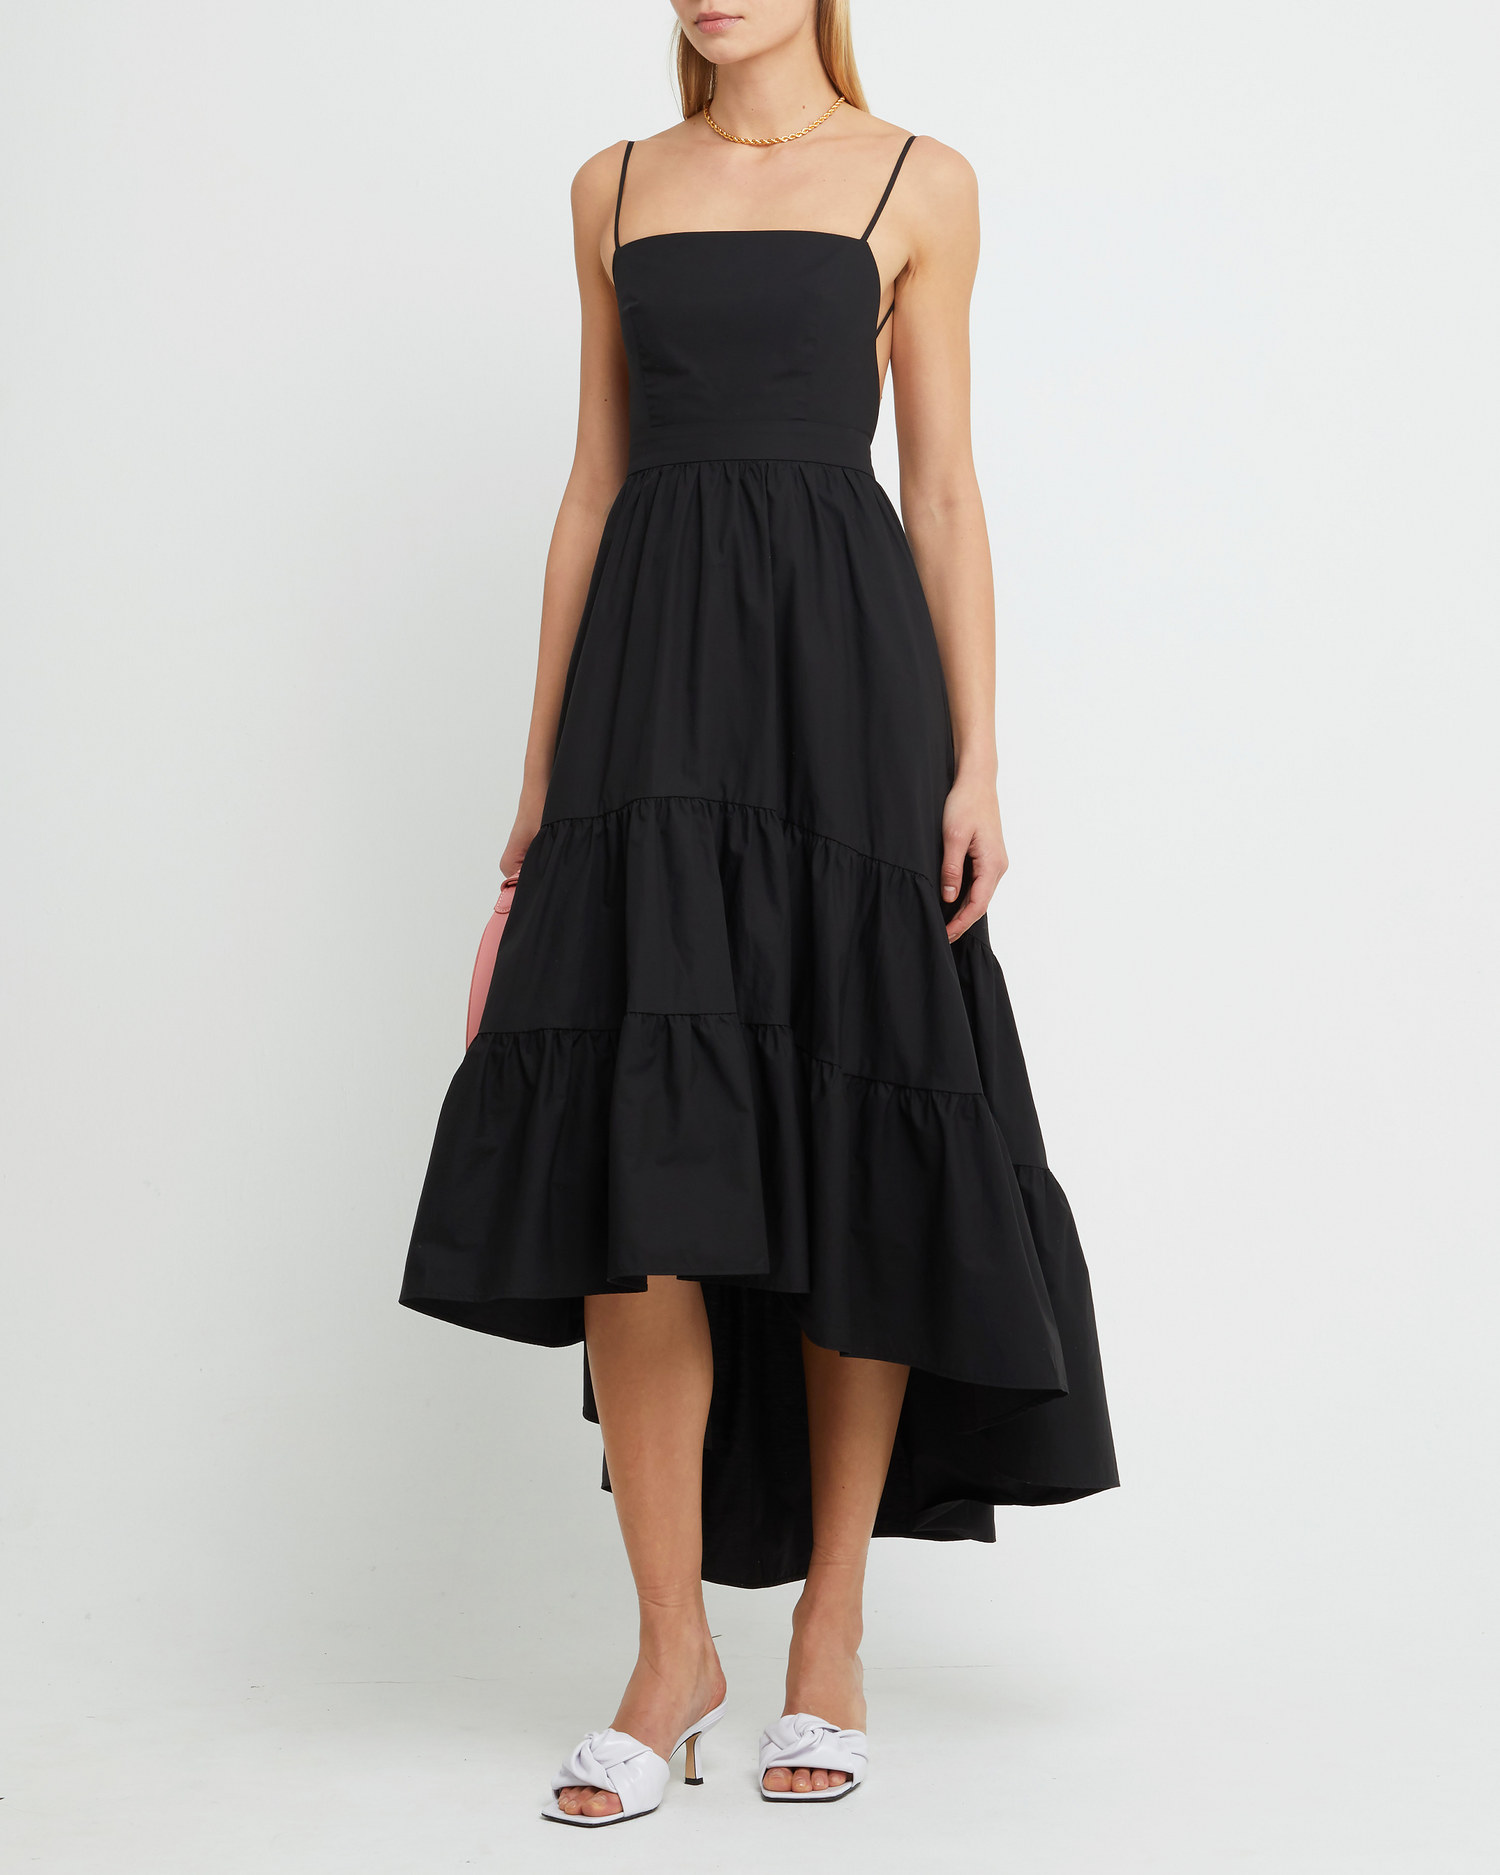 Fifth image of Dionne Cotton Dress, a black maxi dress, spaghette straps, high-low, high low skirt